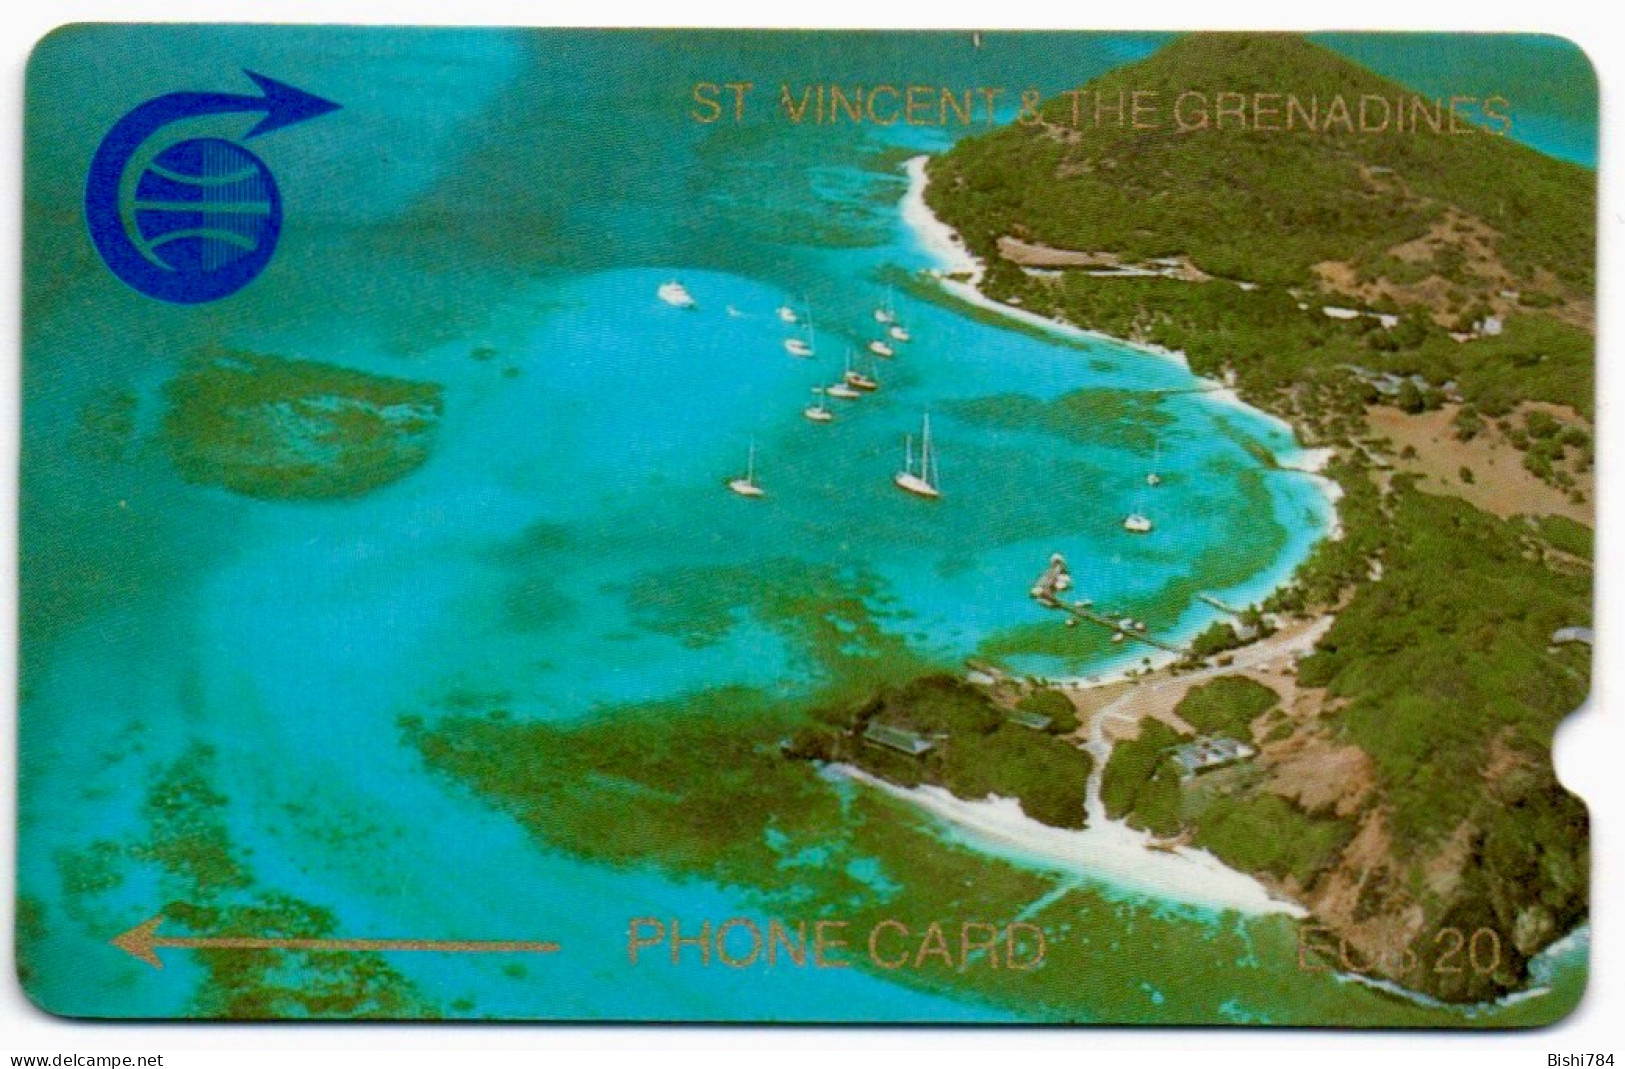 St. Vincent & The Grenadines - Admiralty Bay $40 - 1CSVC - St. Vincent & The Grenadines